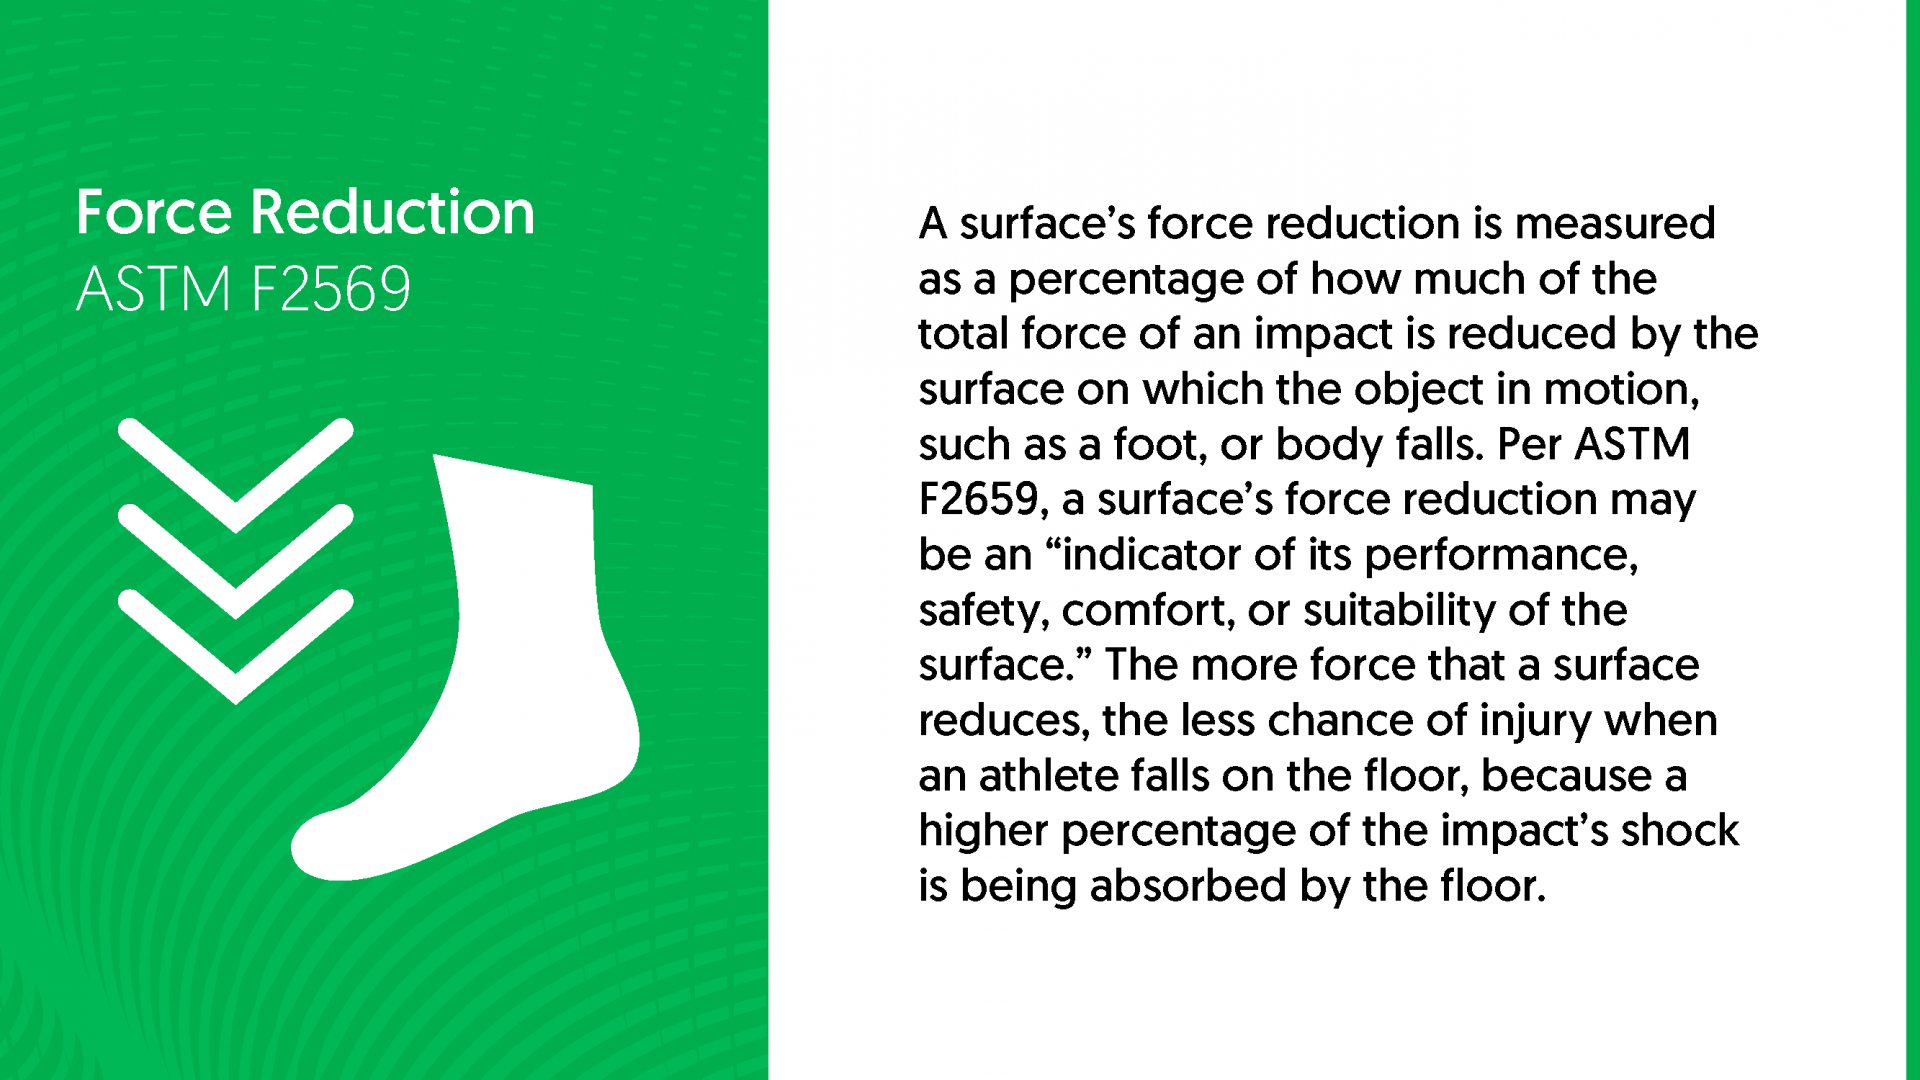 Force Reduction (ASTM F2569)